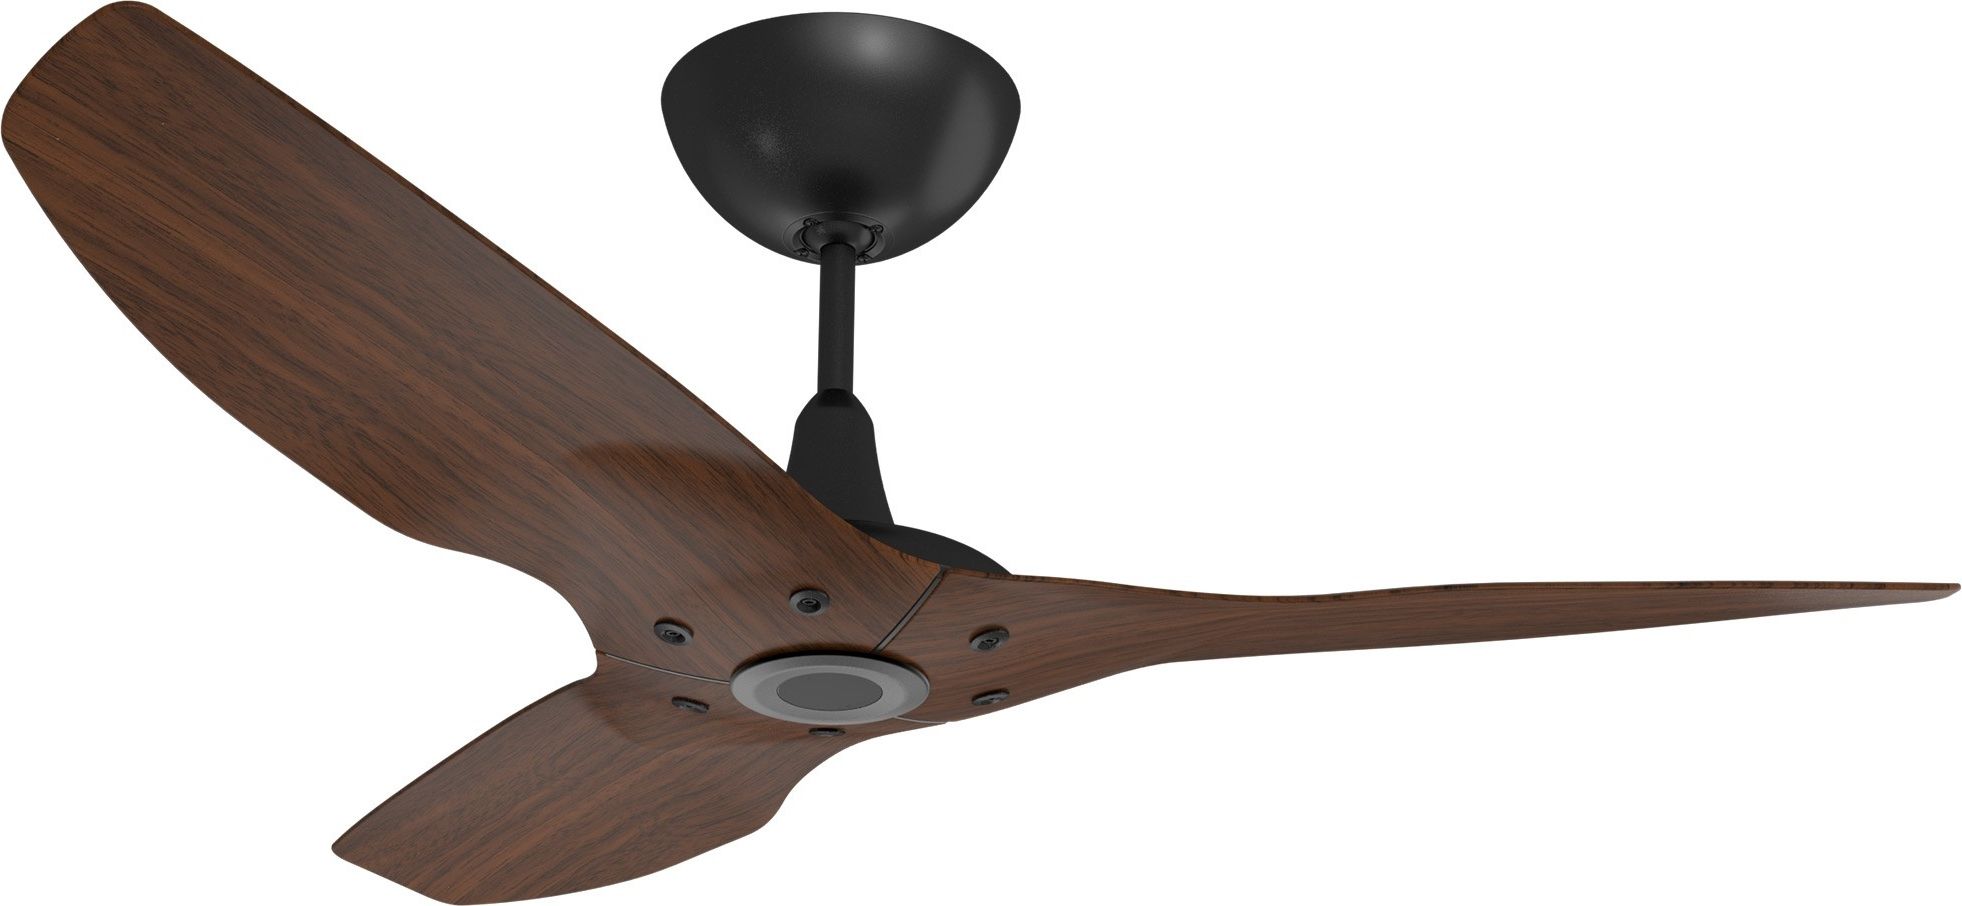 High End Outdoor Ceiling Fans Throughout Latest Haiku Outdoor Ceiling Fan: 52", Cocoa Woodgrain Aluminum, Universal (View 3 of 20)